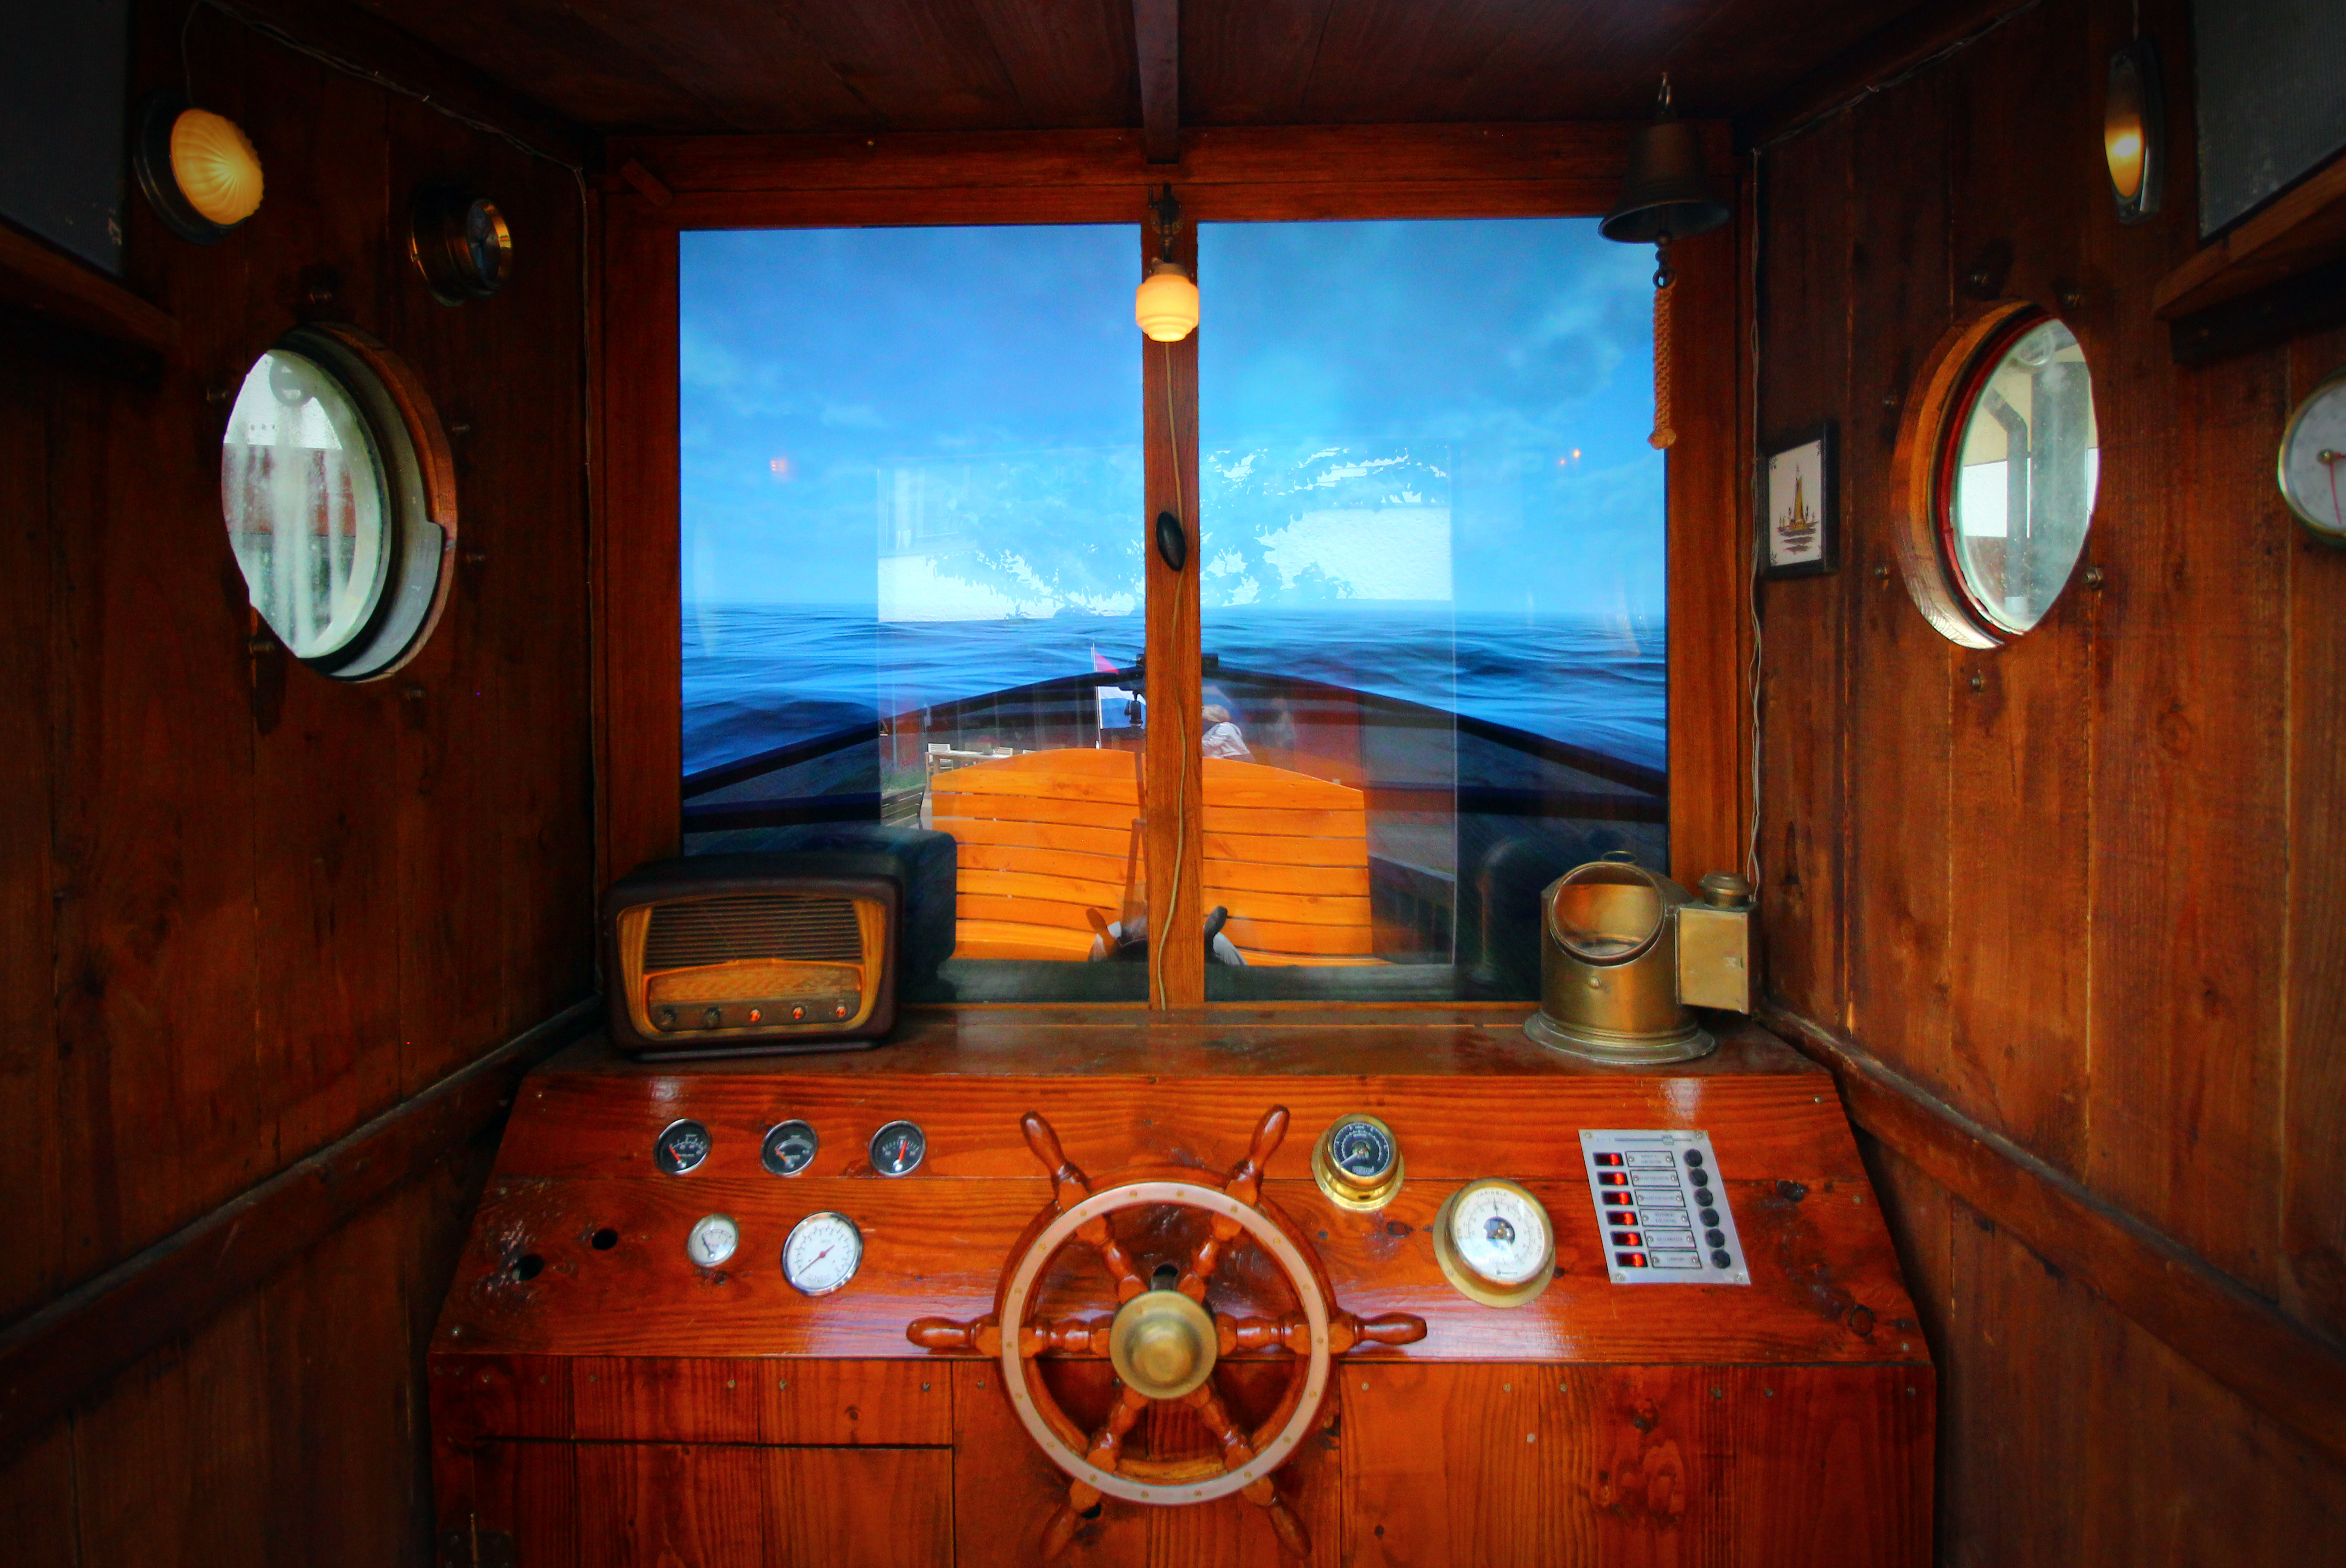 They can use the wheel to steer the boat and watch the physical compass match the new course. The wheelhouse is filled with the familiar sounds of the wooden boat creaking, the engine chugging along, the waves lapping against the boat and the seagulls calling. A vintage radio provides multiple channels of well-known Dutch fisherman’s songs and sea shanties from residents’ youths to stir their memories.